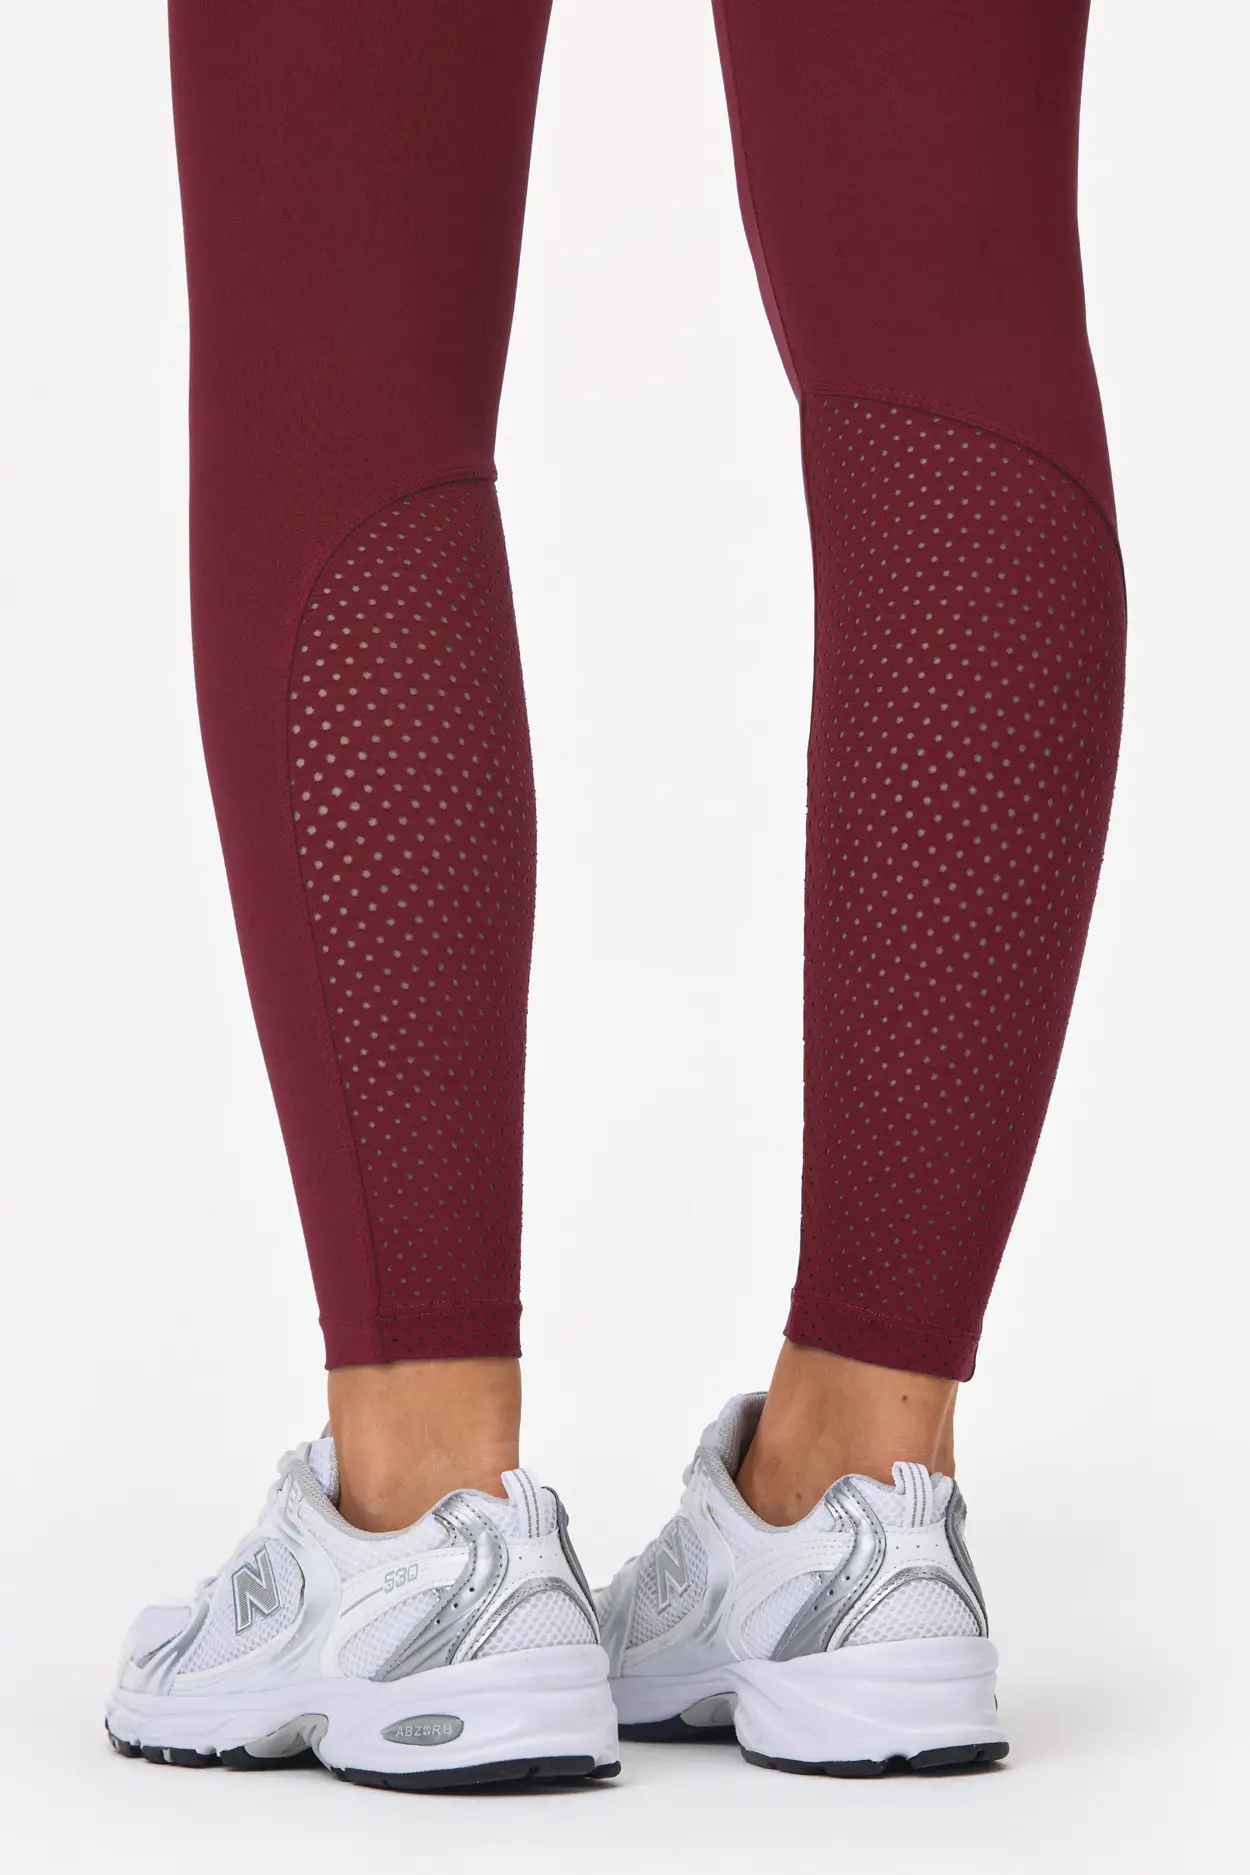 Zyia Active Athletic Tights